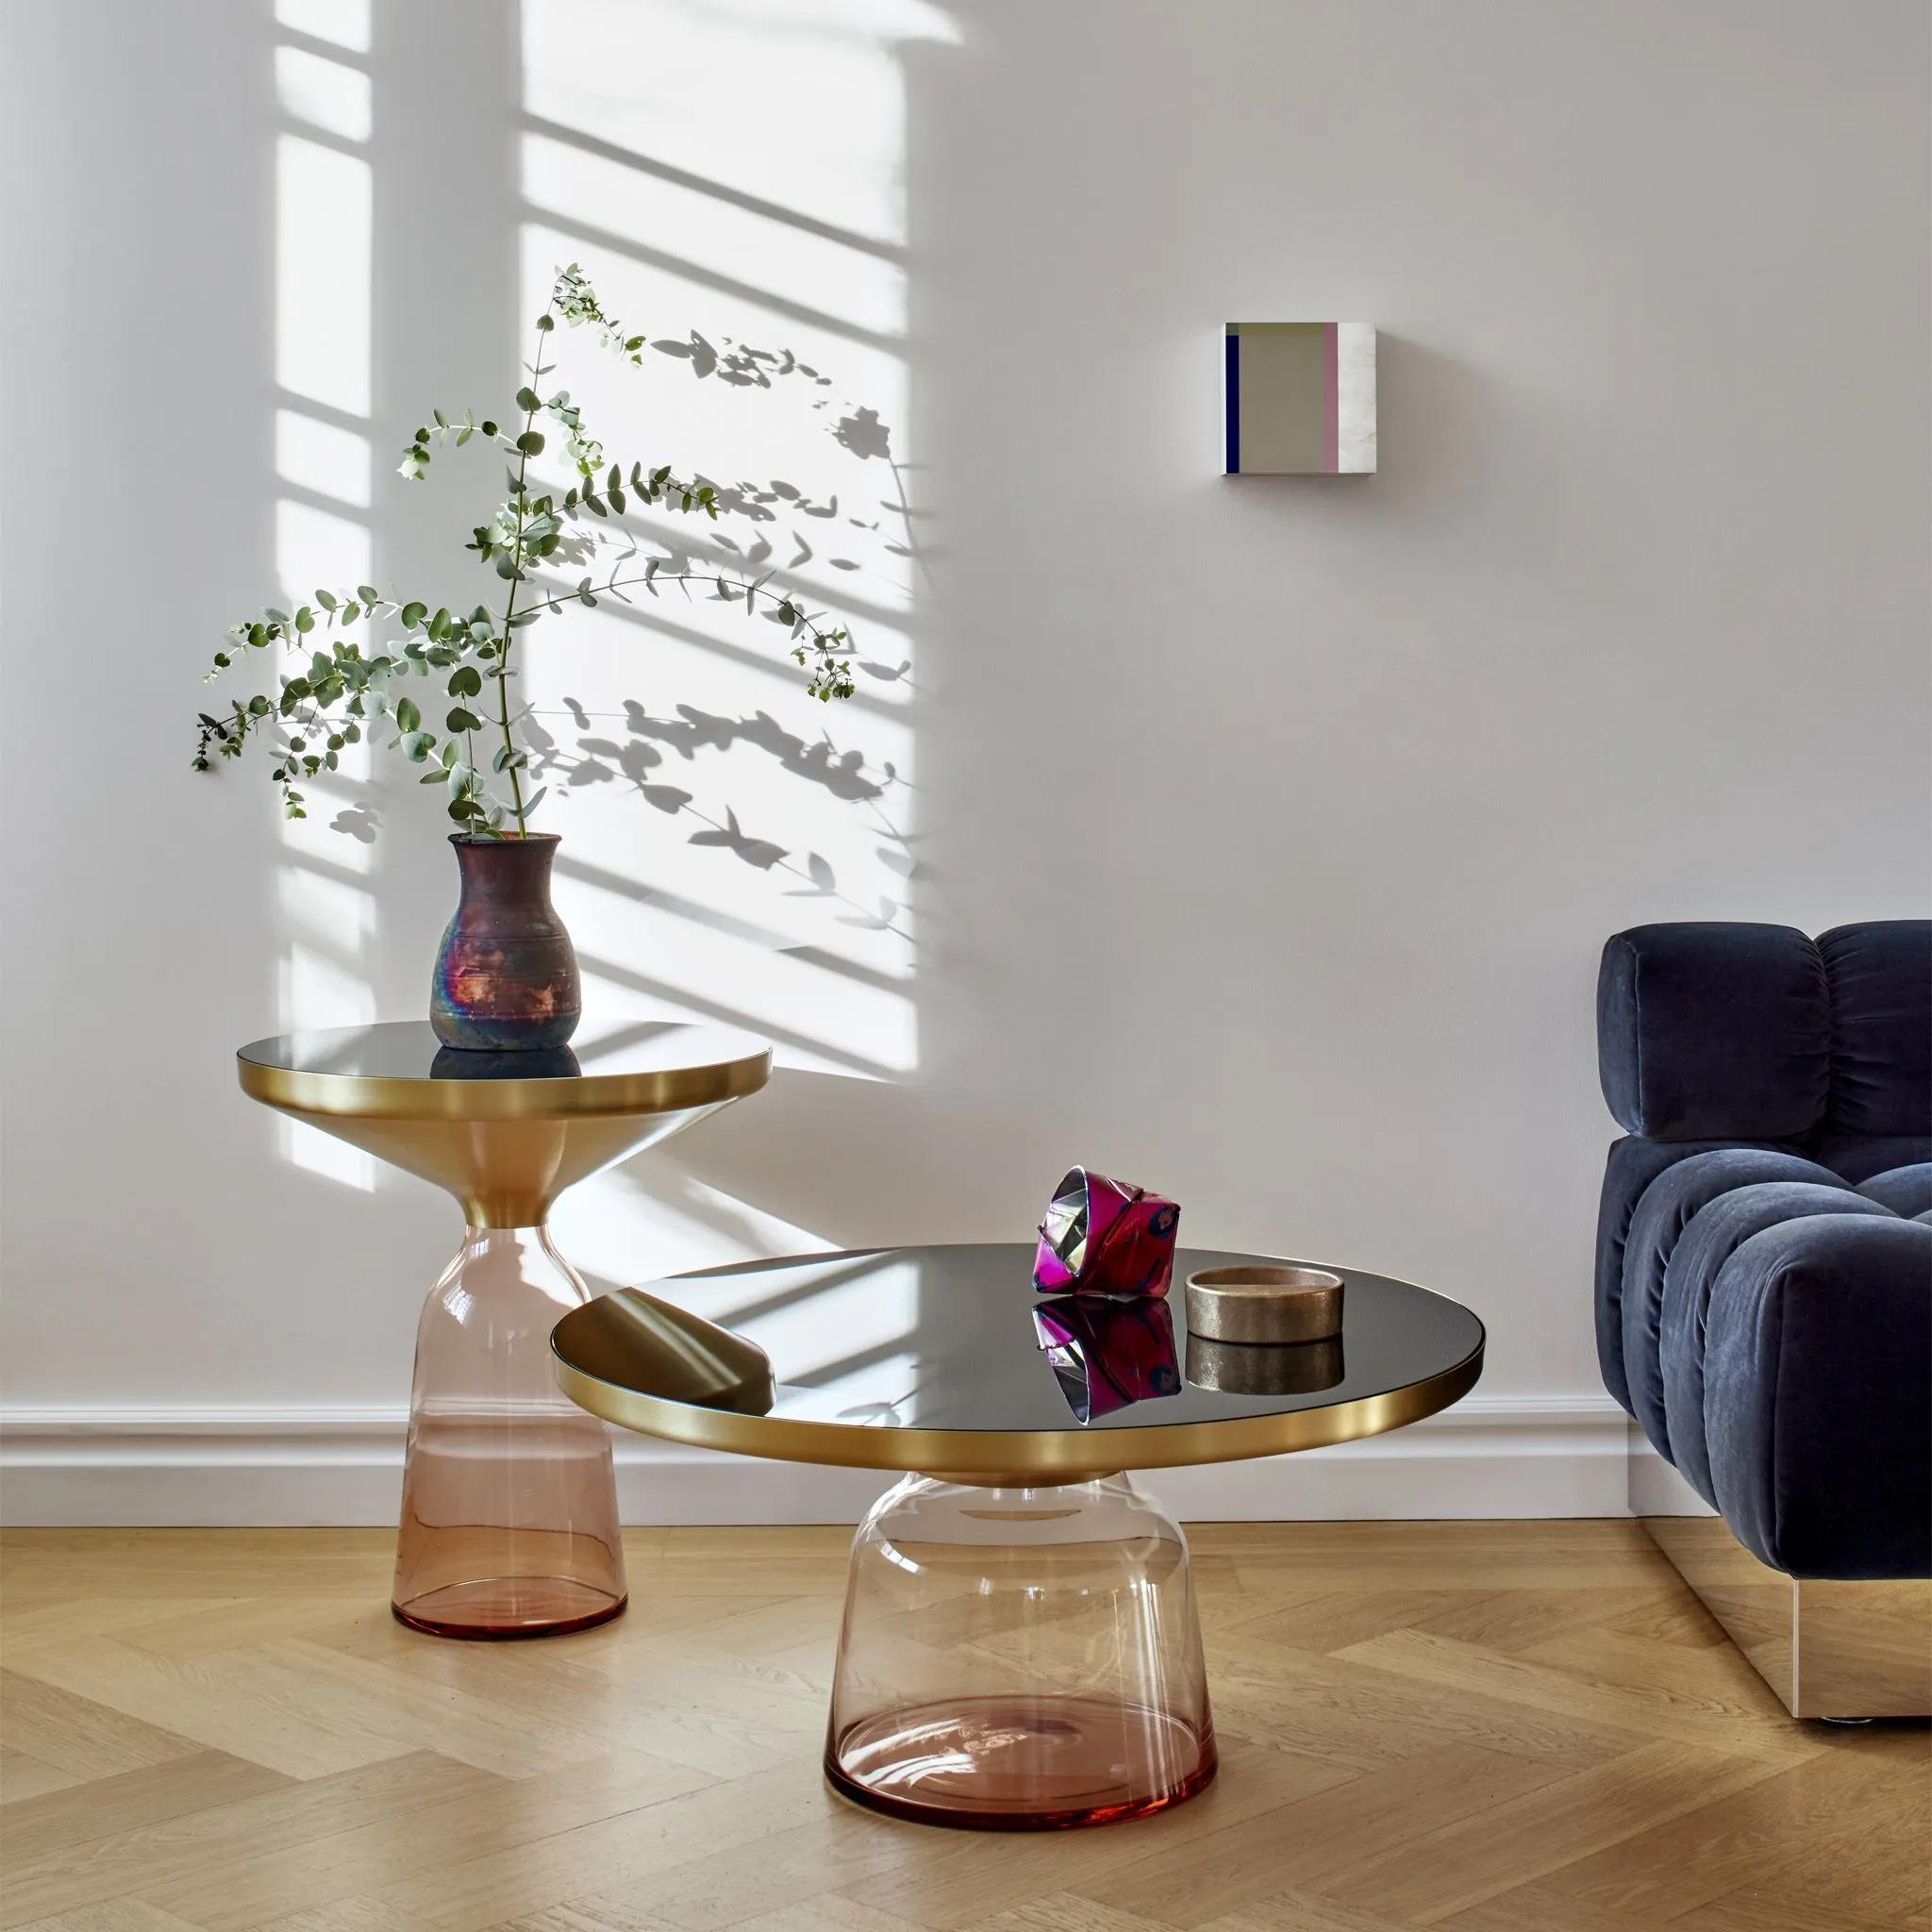 
The bell table by Sebastian Herkner turns our perceptual habits on their head, using the lightweight, fragile material of glass as base for a metal top that seems to float above it. Hand blown in the traditional manner using a wooden mold, the